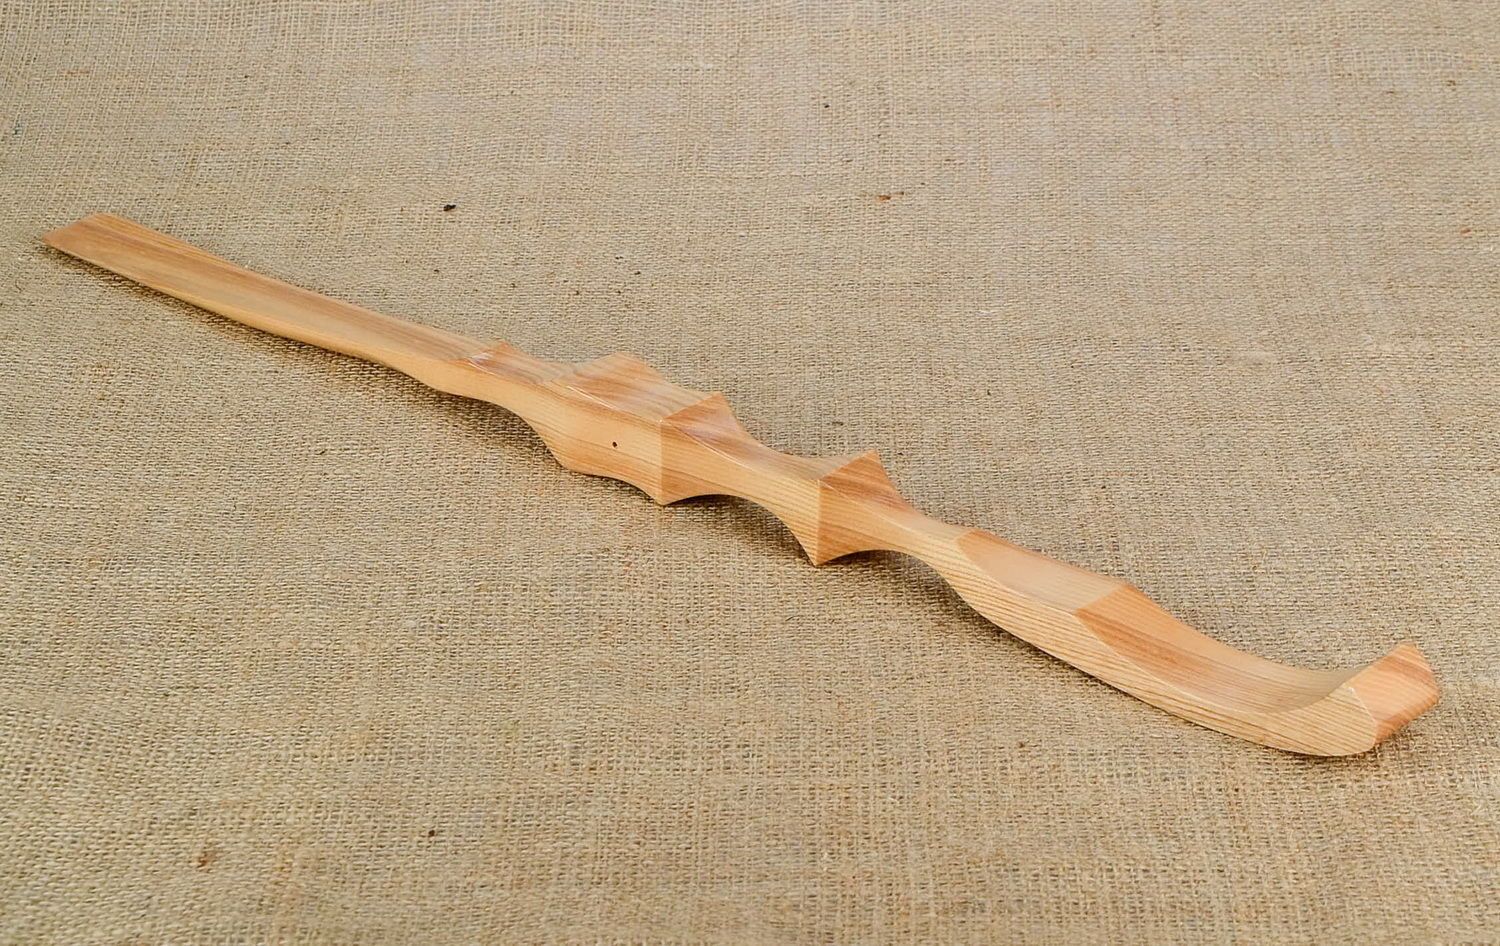 Wooden Shoehorn photo 1